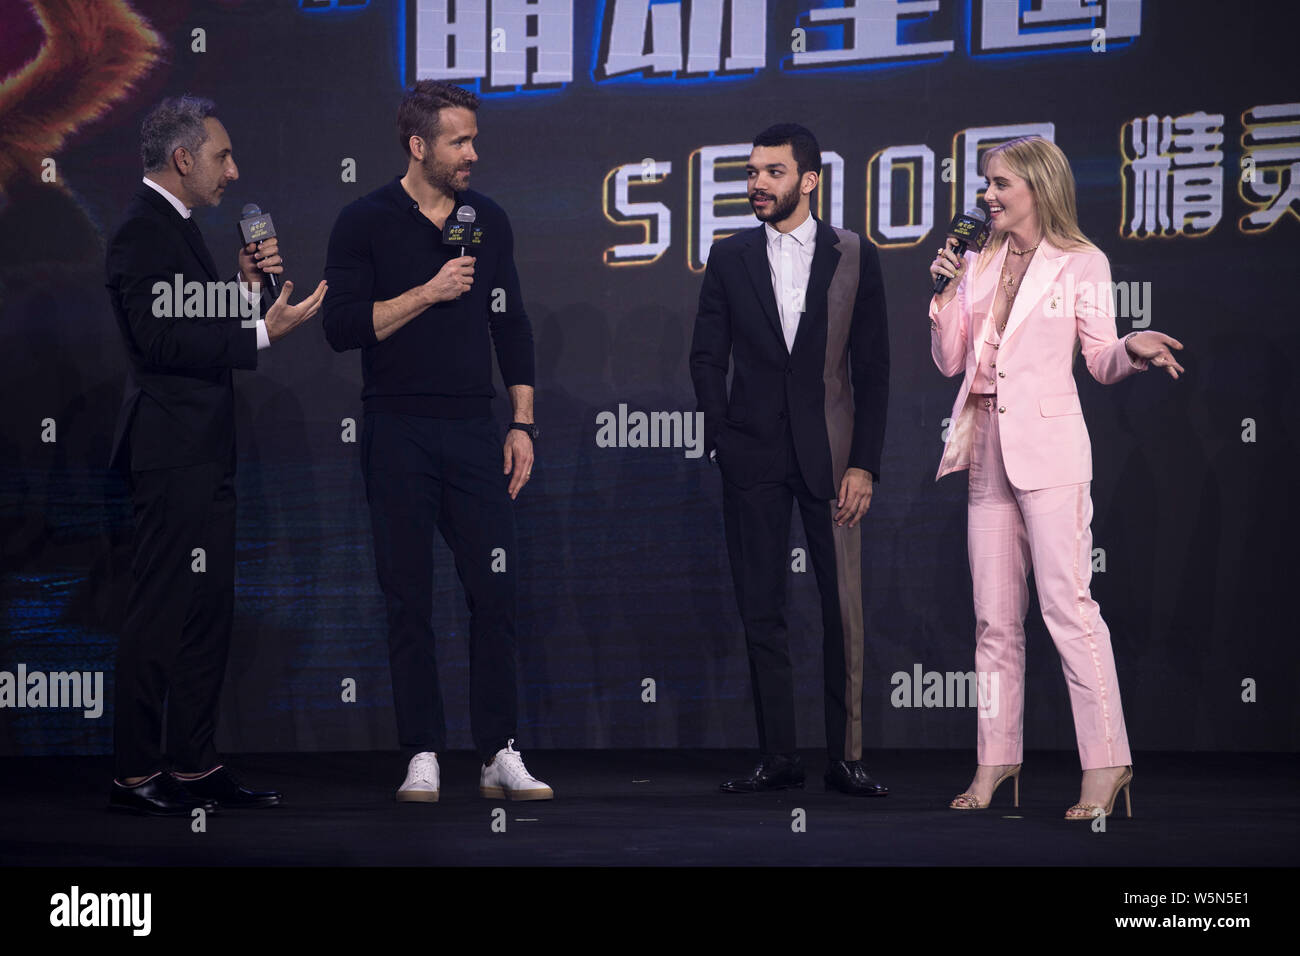 (From right) American actress Kathryn Newton, actor Justice Smith, Canadian-American actor Ryan Reynolds, and American film director Rob Letterman att Stock Photo